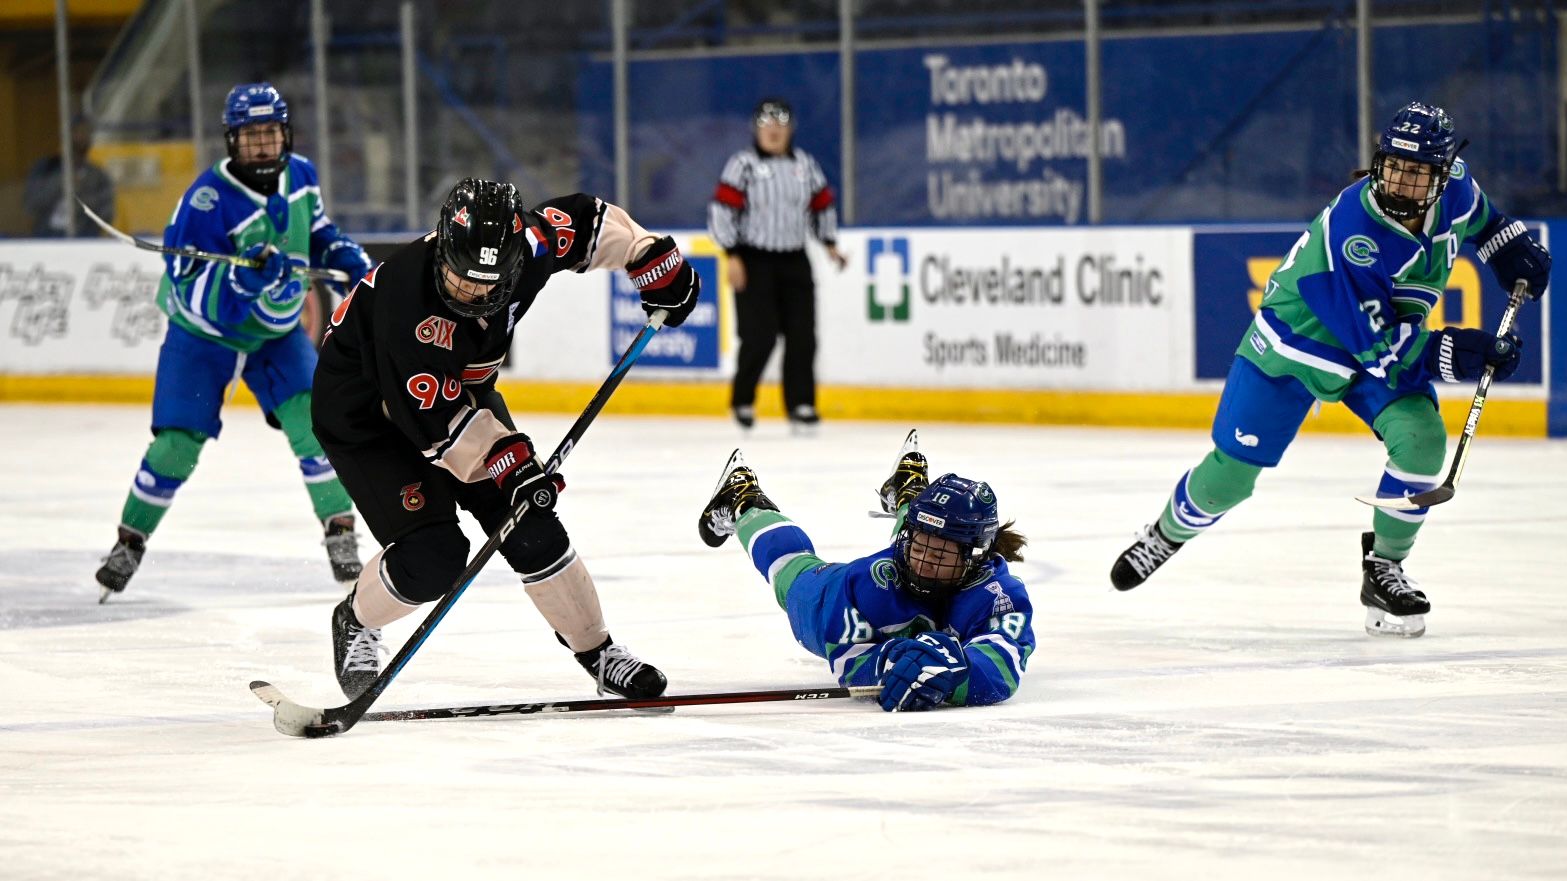 PHF Playoff Preview: Isobel Cup Final